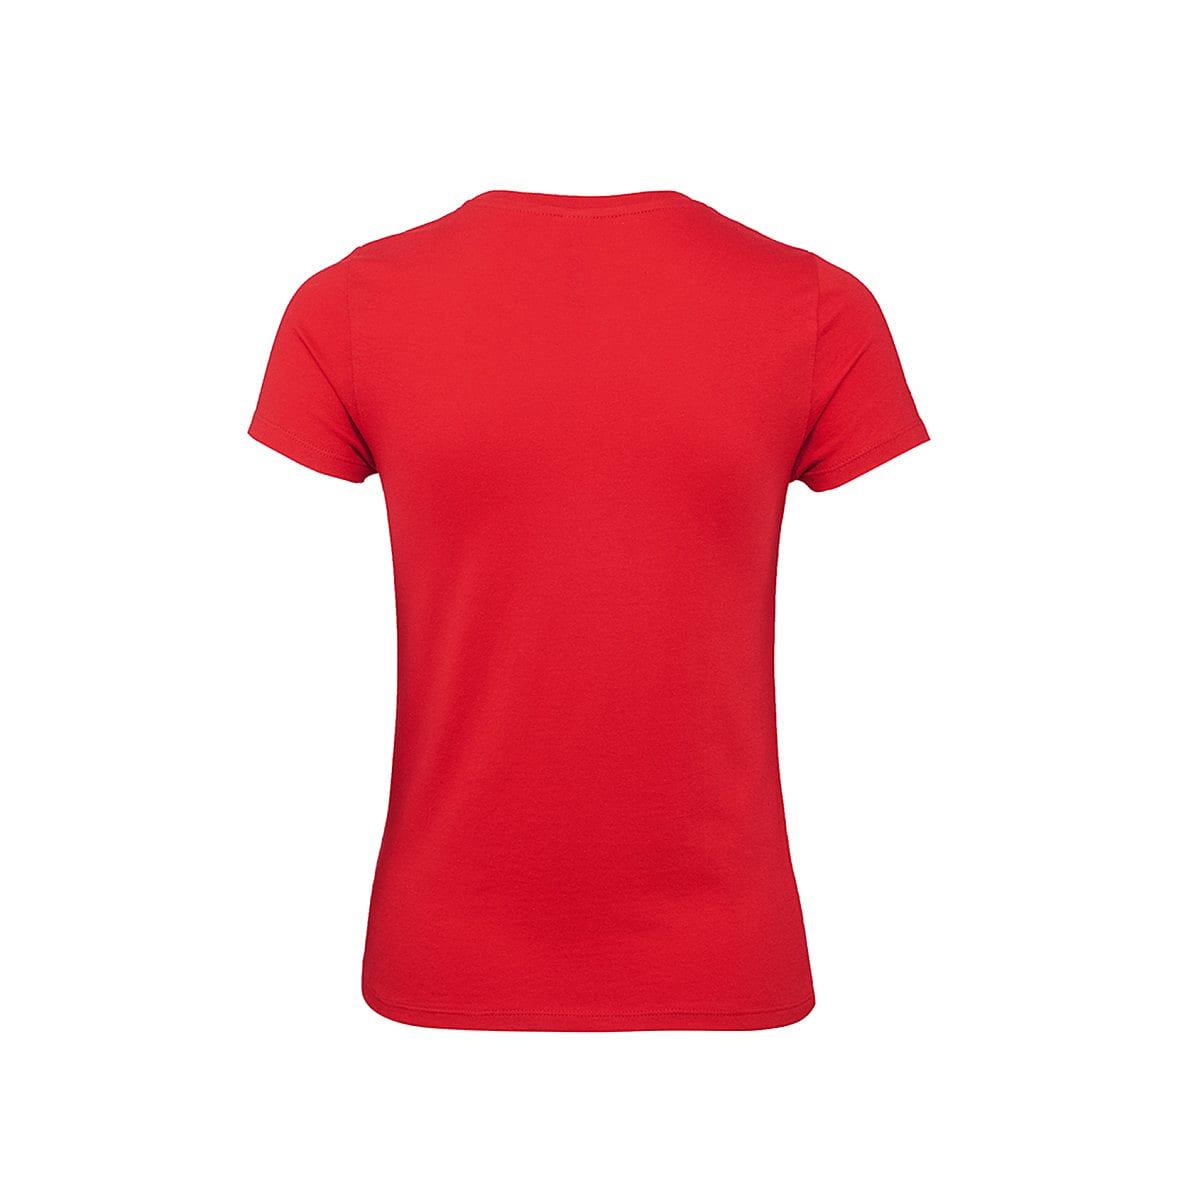 B&C Womens E150 T-Shirt in Red (Product Code: TW02T)